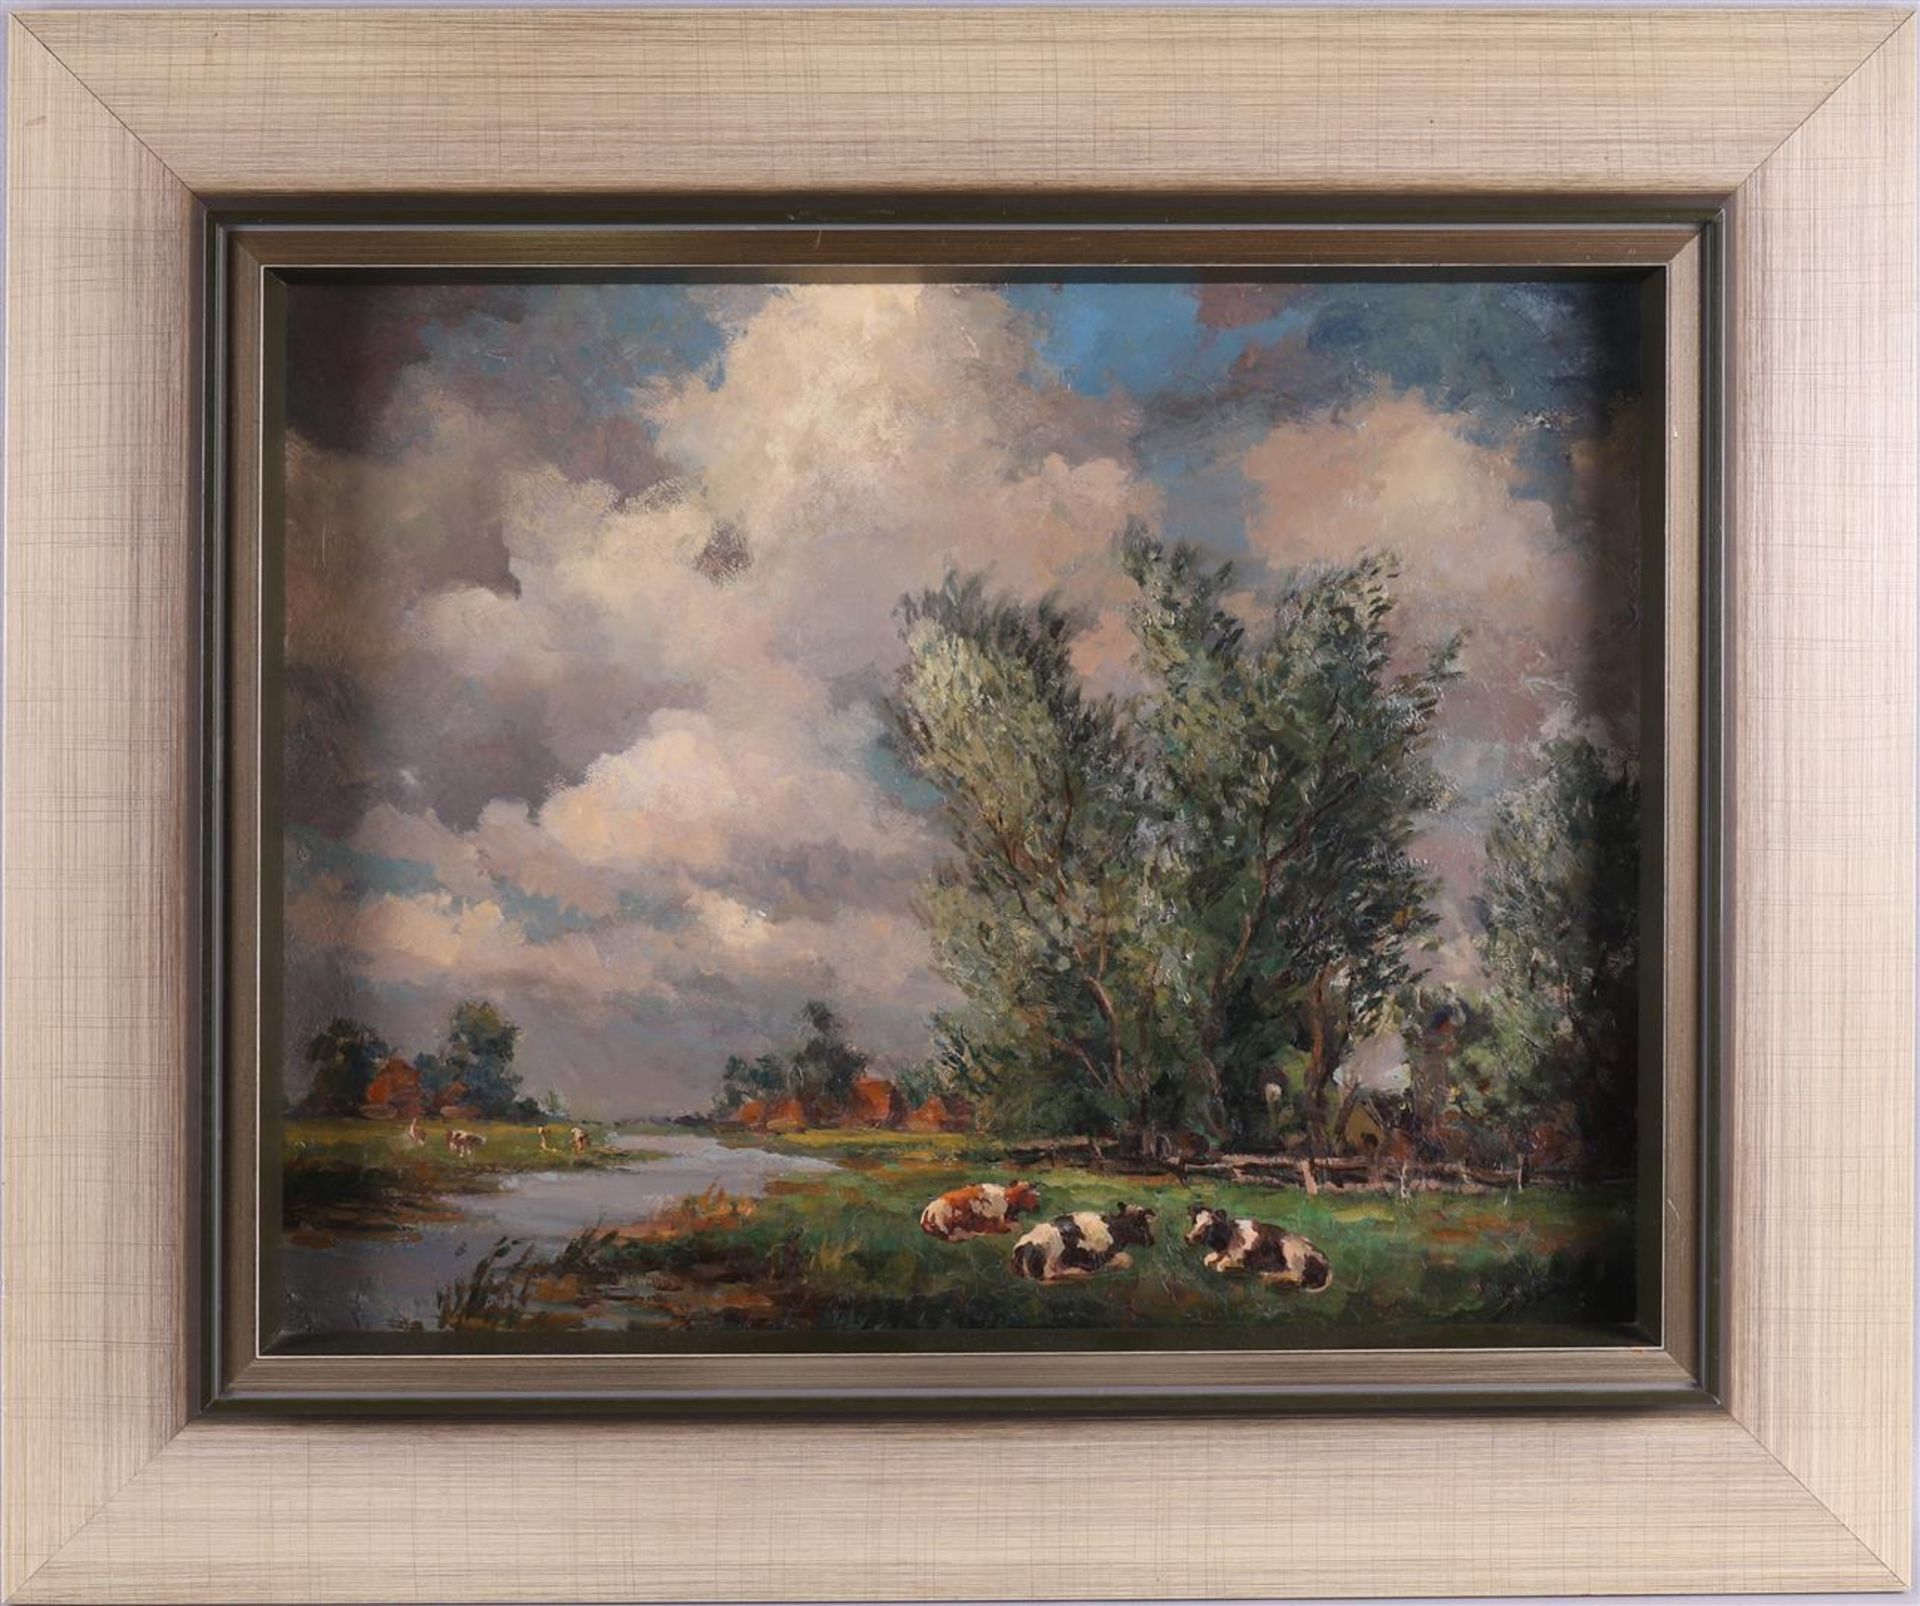 Vries, de Sjoerd (1941-2020) "View of Goingarijp with cows in the foreground", signed in full l.r.